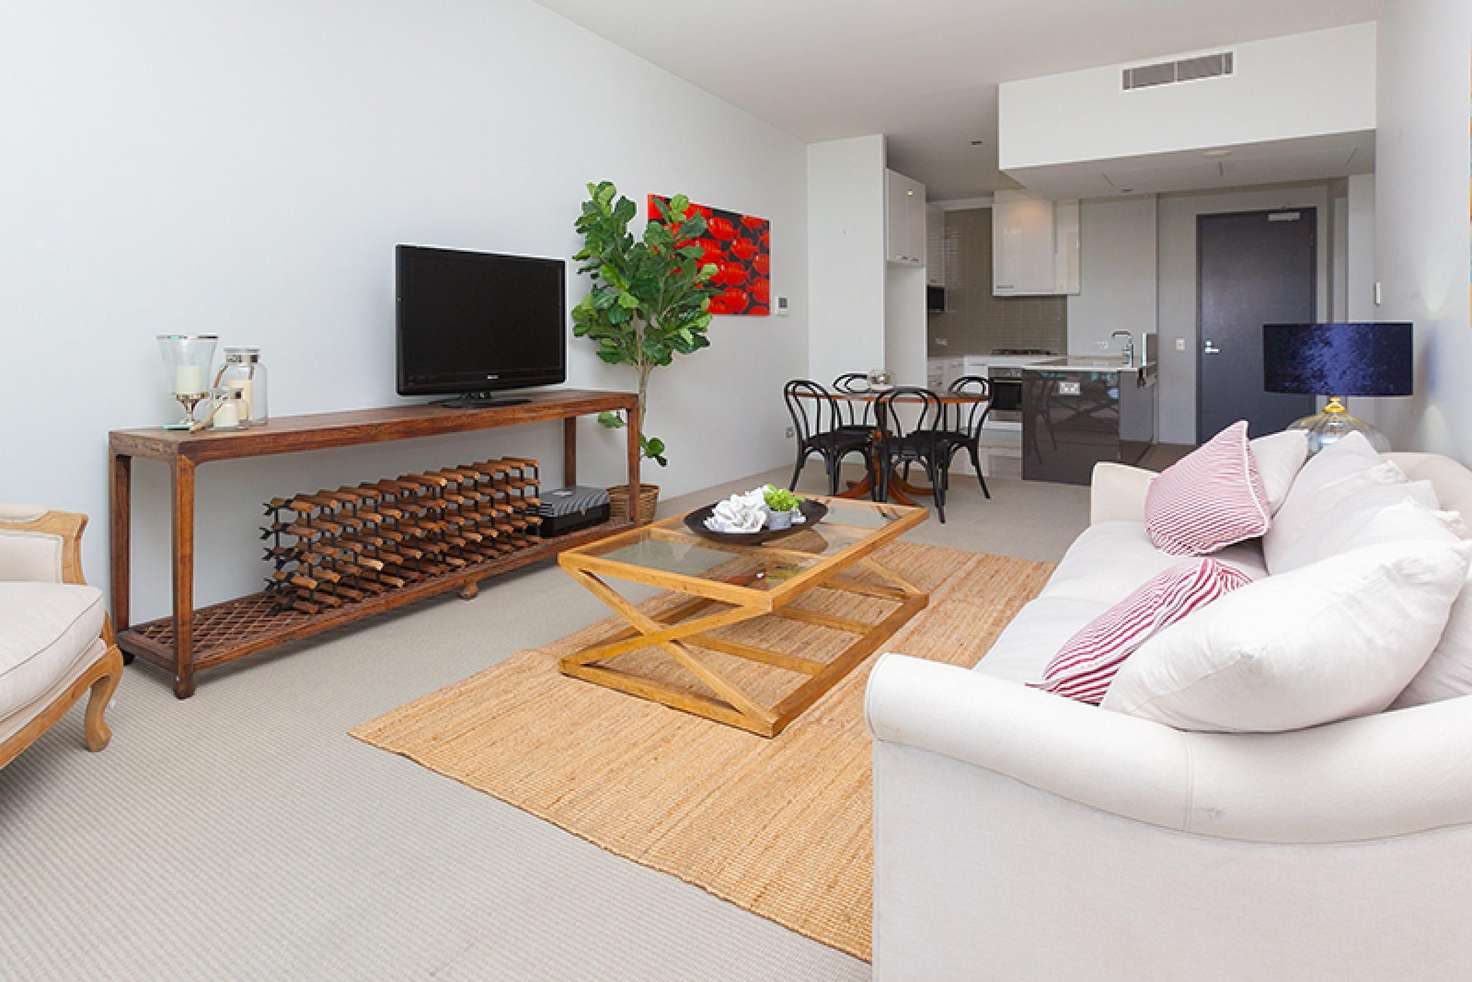 Main view of Homely apartment listing, 20 Newstead Terrace, Newstead QLD 4006